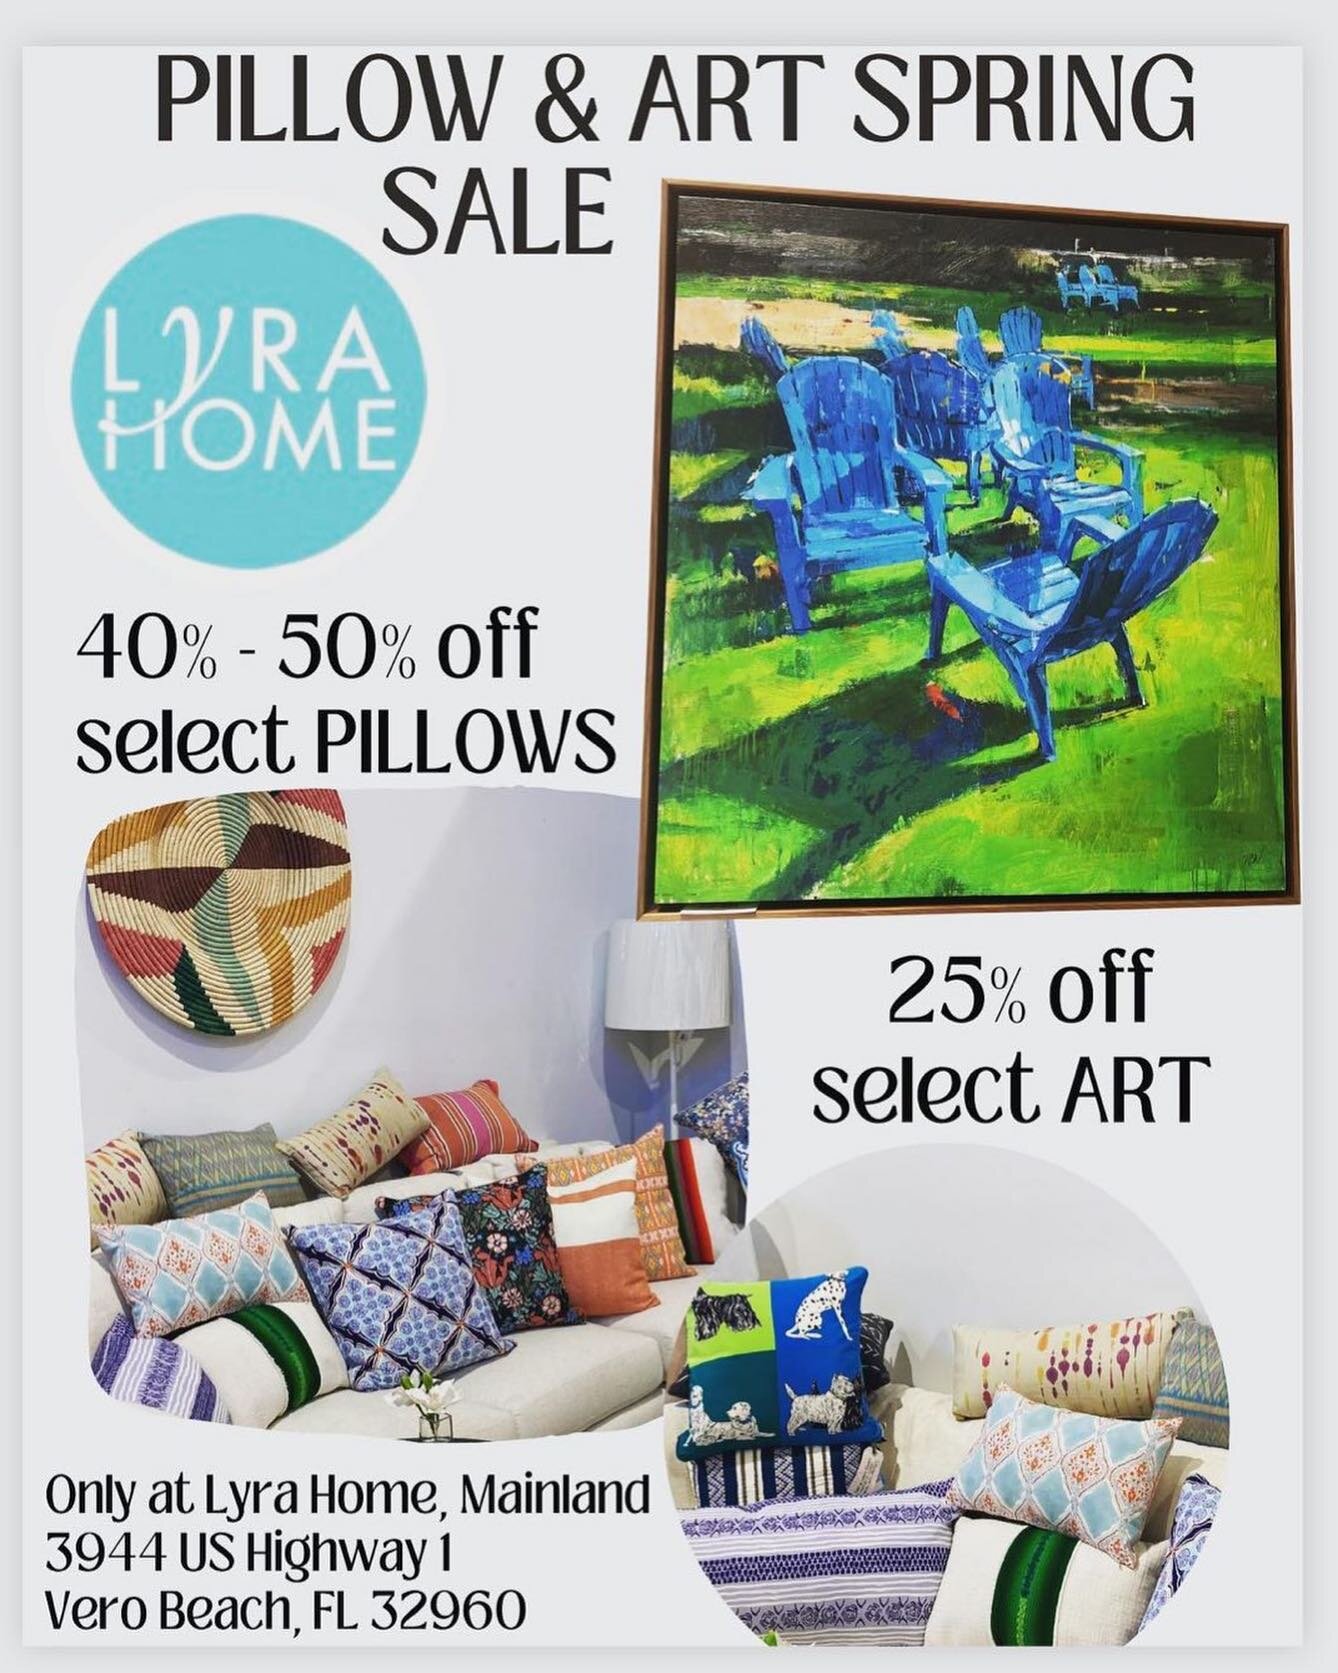 Visit us at our mainland location to see all the wonderful pieces on sale this week!